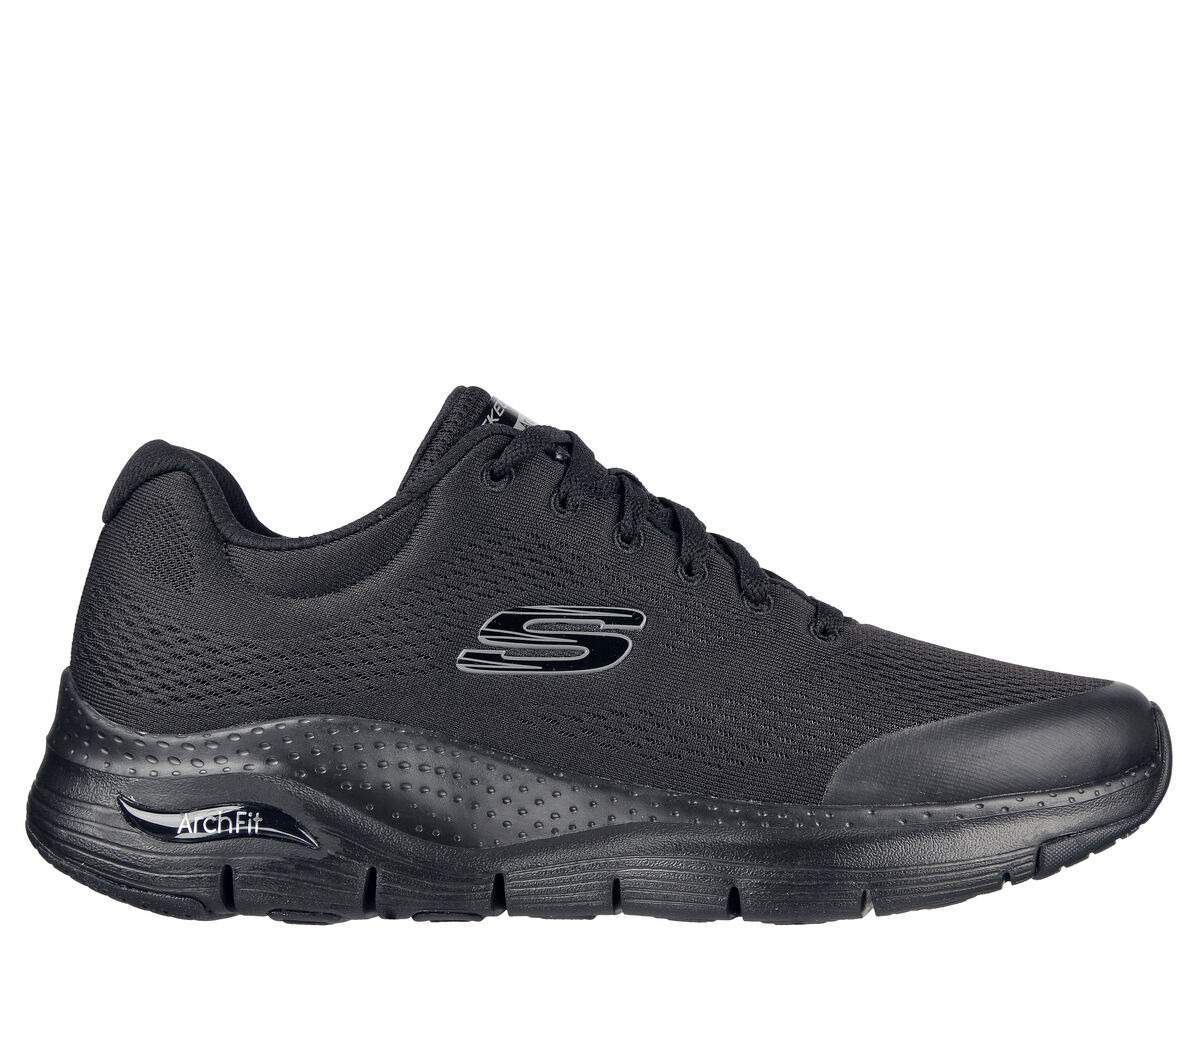 What Are Arch Fit Skechers? - Shoe Effect